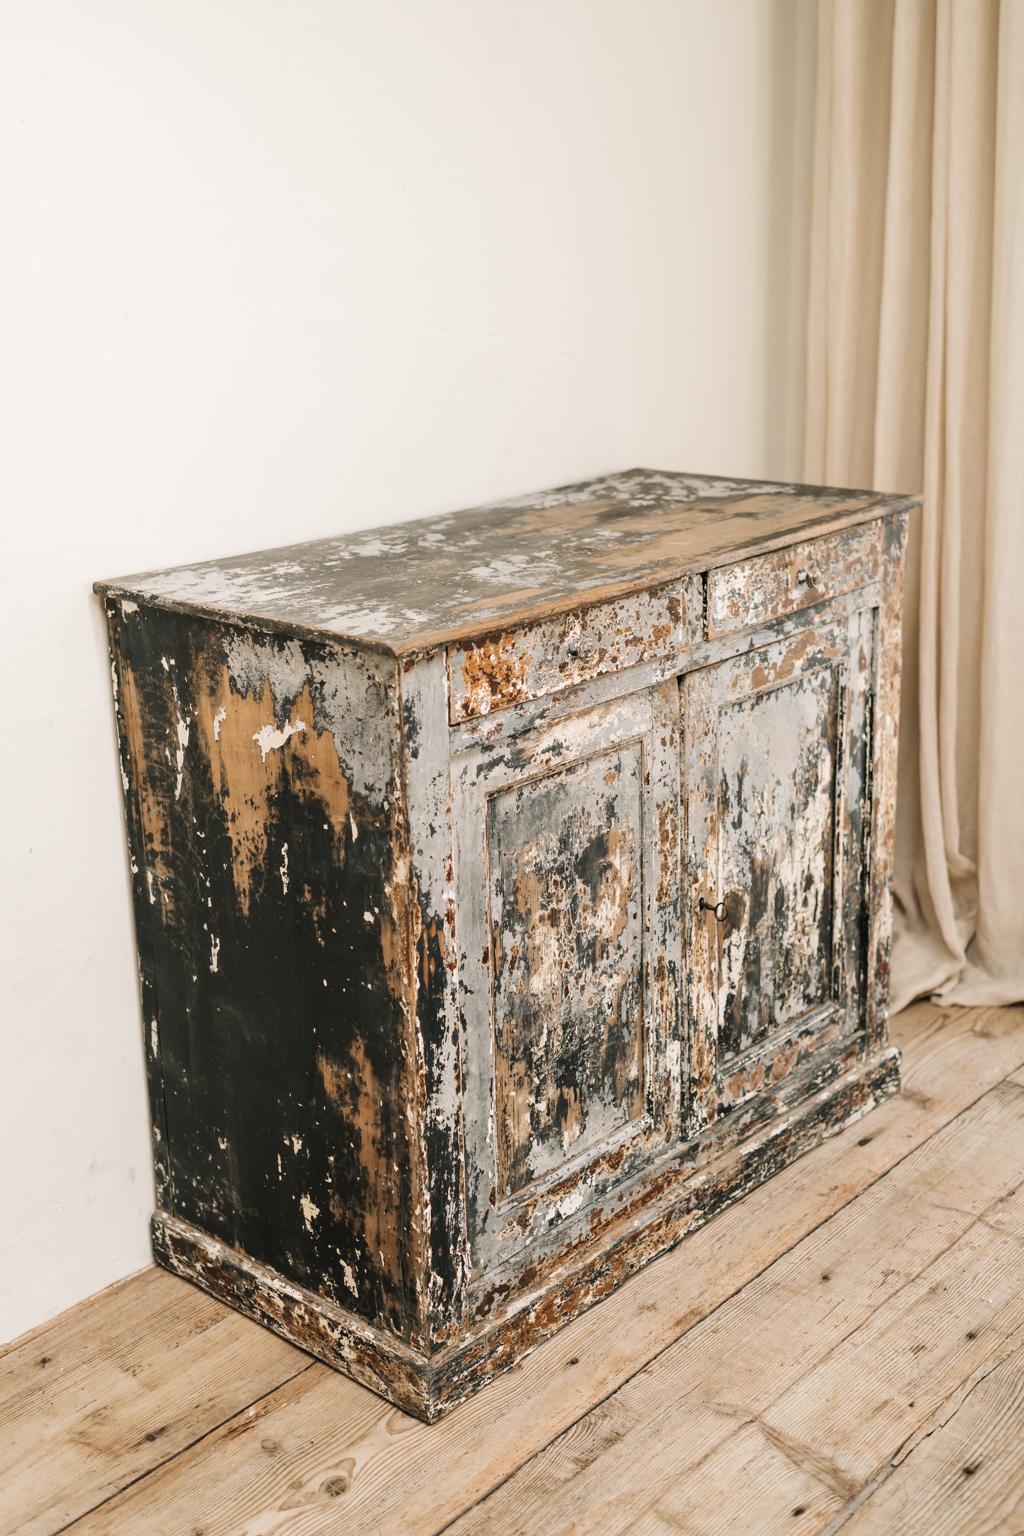 Sublime distressed patina, just as we like it, genuine 19th century French cabinet, rests of old paint.